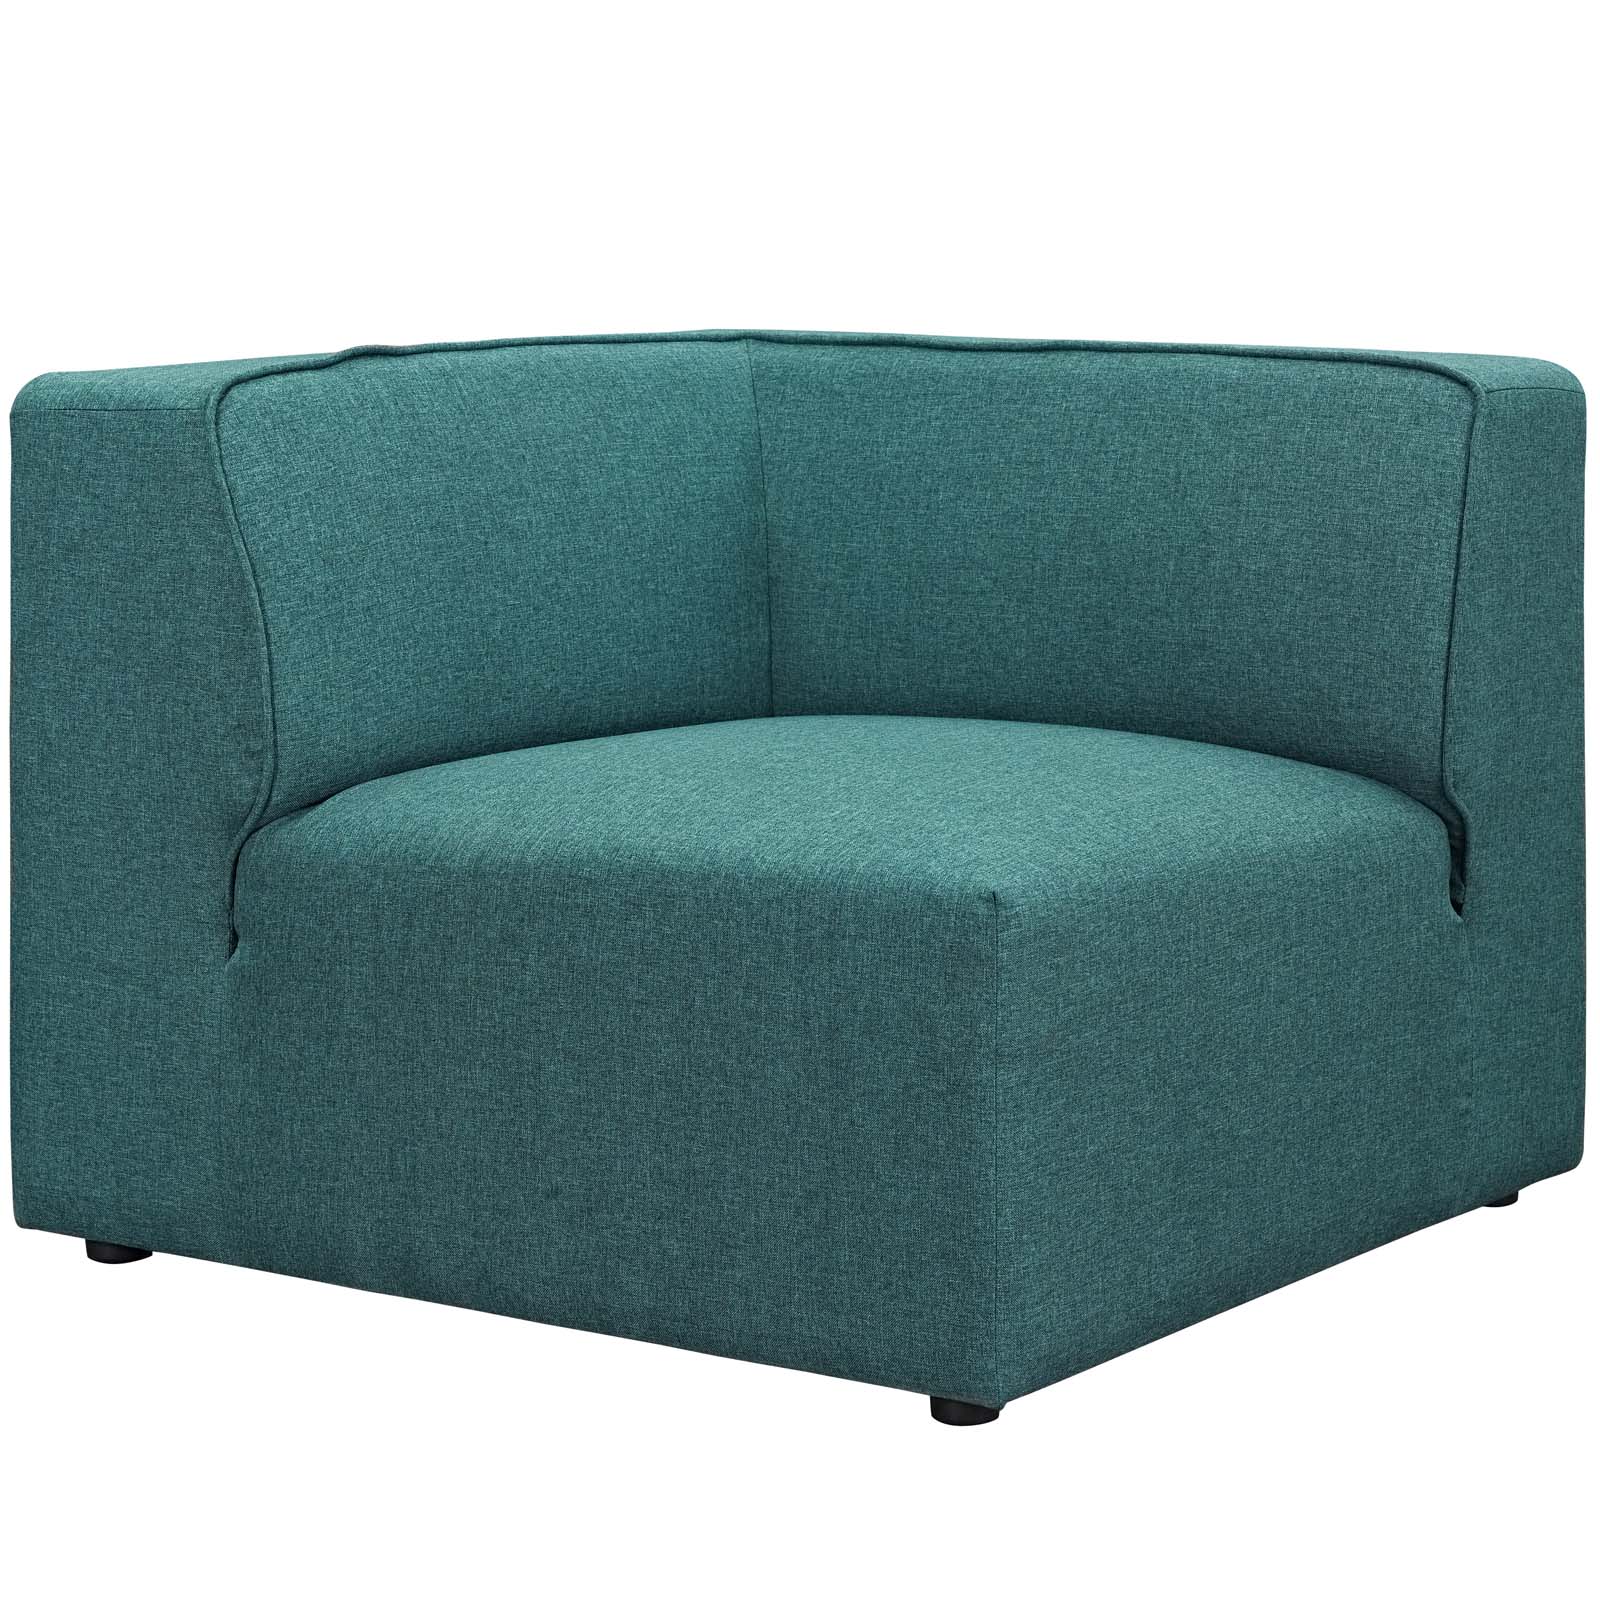 Modway Sectional Sofas - Mingle 5 Piece Upholstered 115"W Fabric Sectional Sofa Set Teal